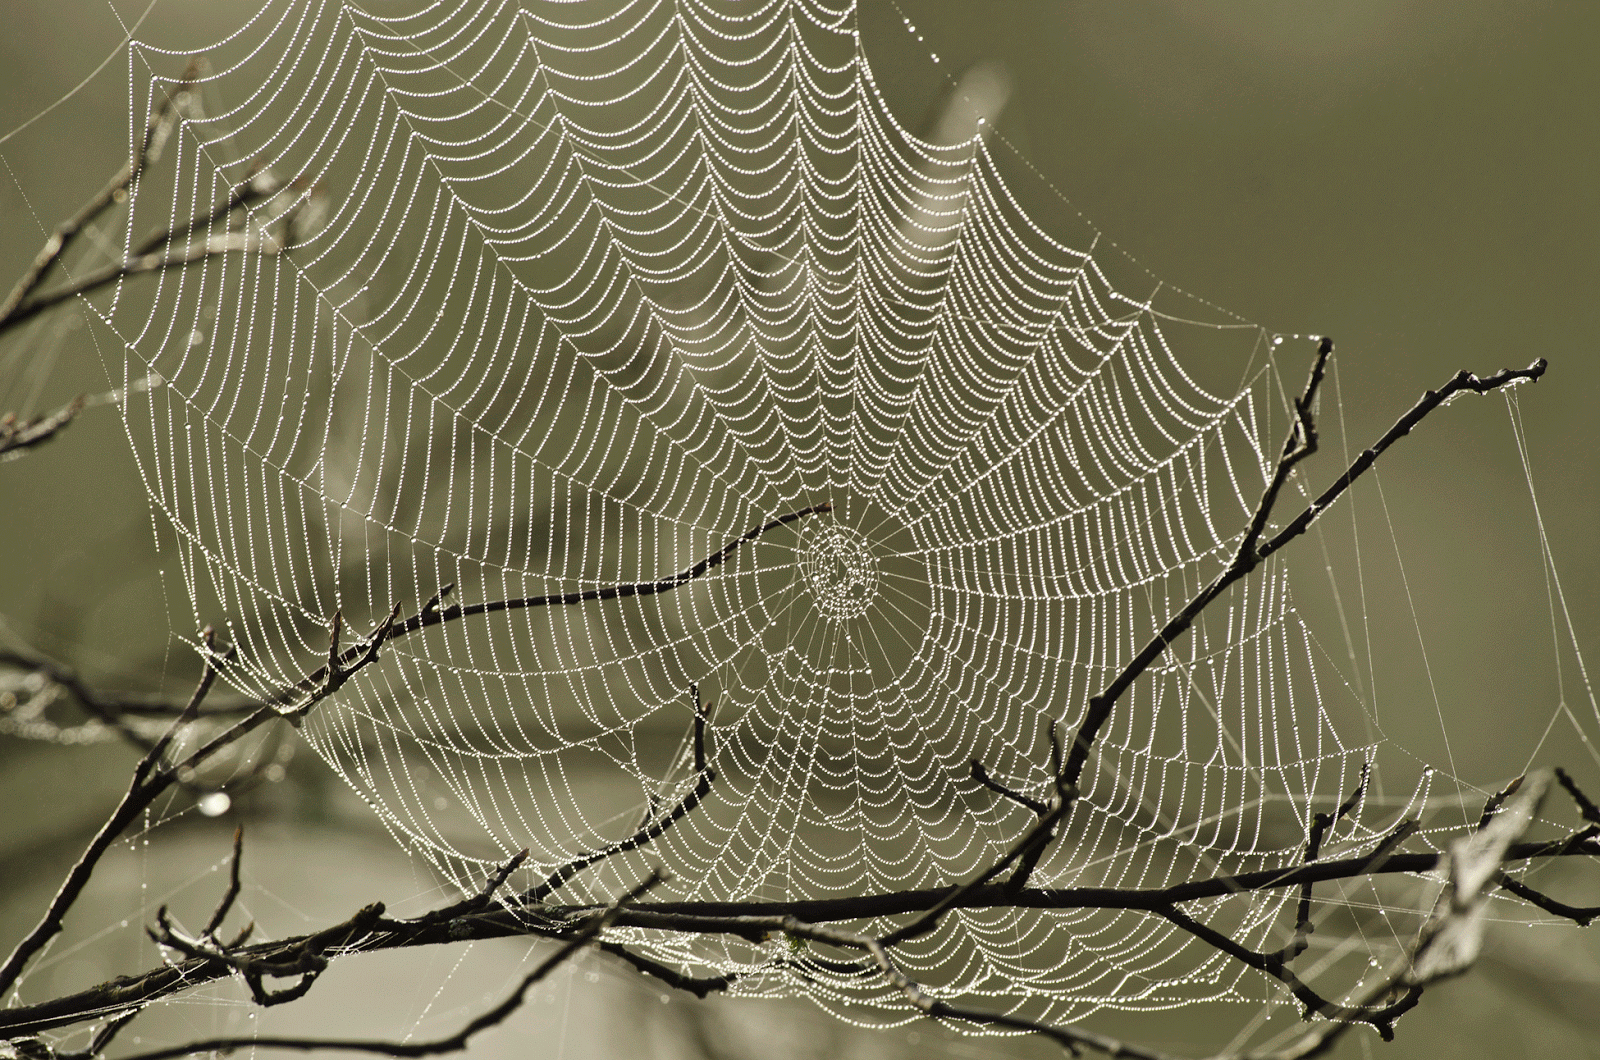 Spider Web With Dew Drops.